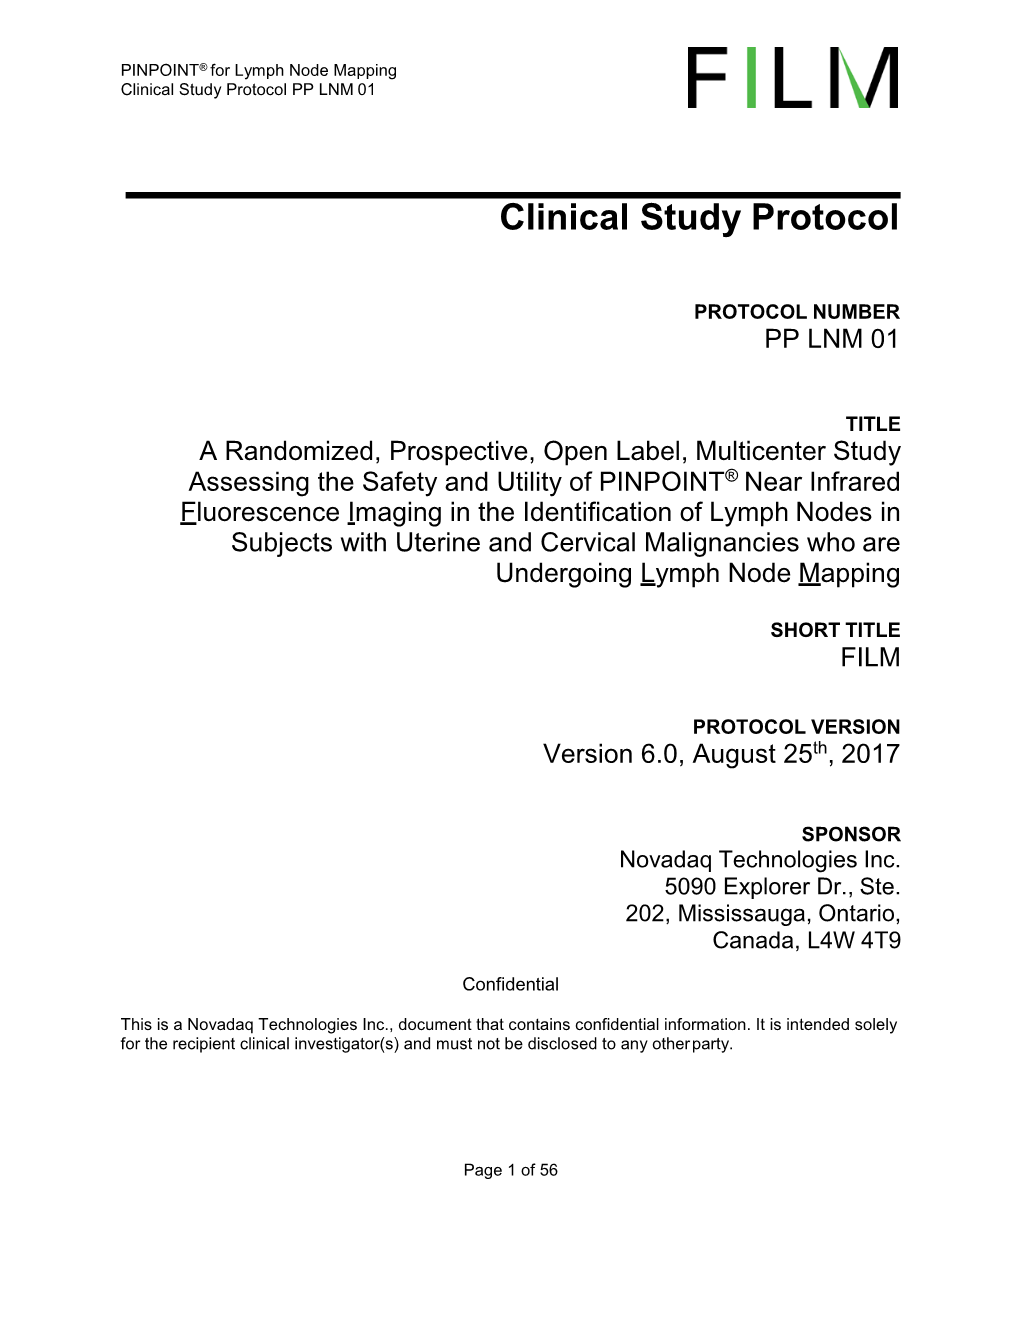 Clinical Study Protocol PP LNM 01